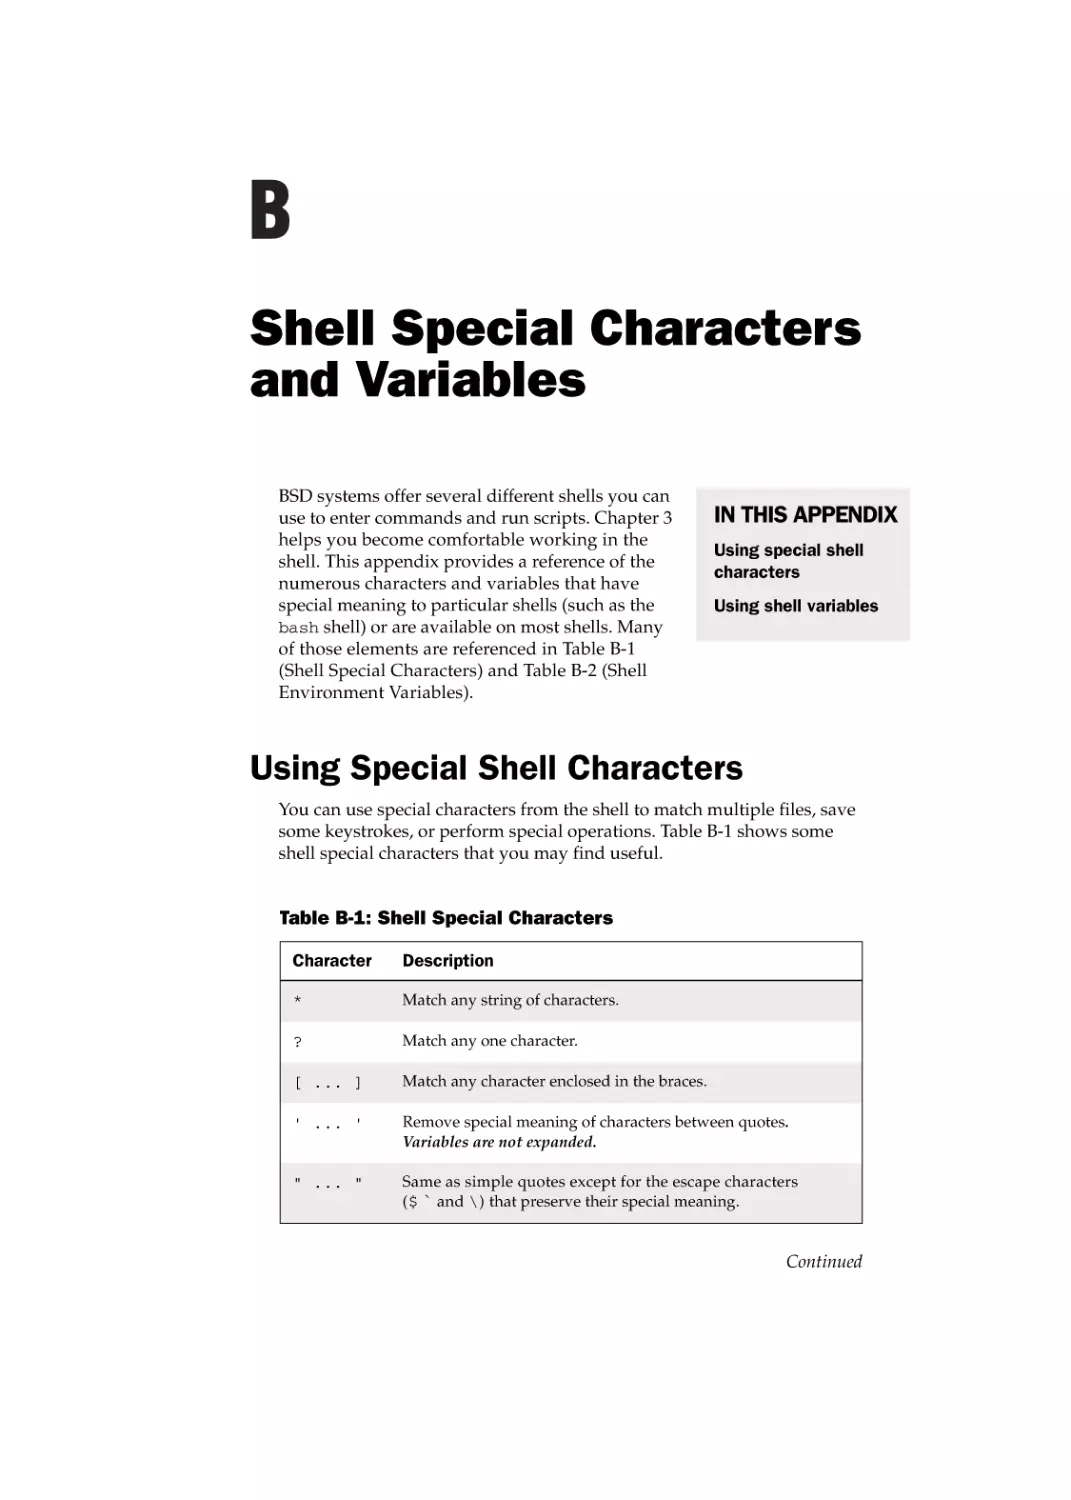 Appendix B
Using Special Shell Characters